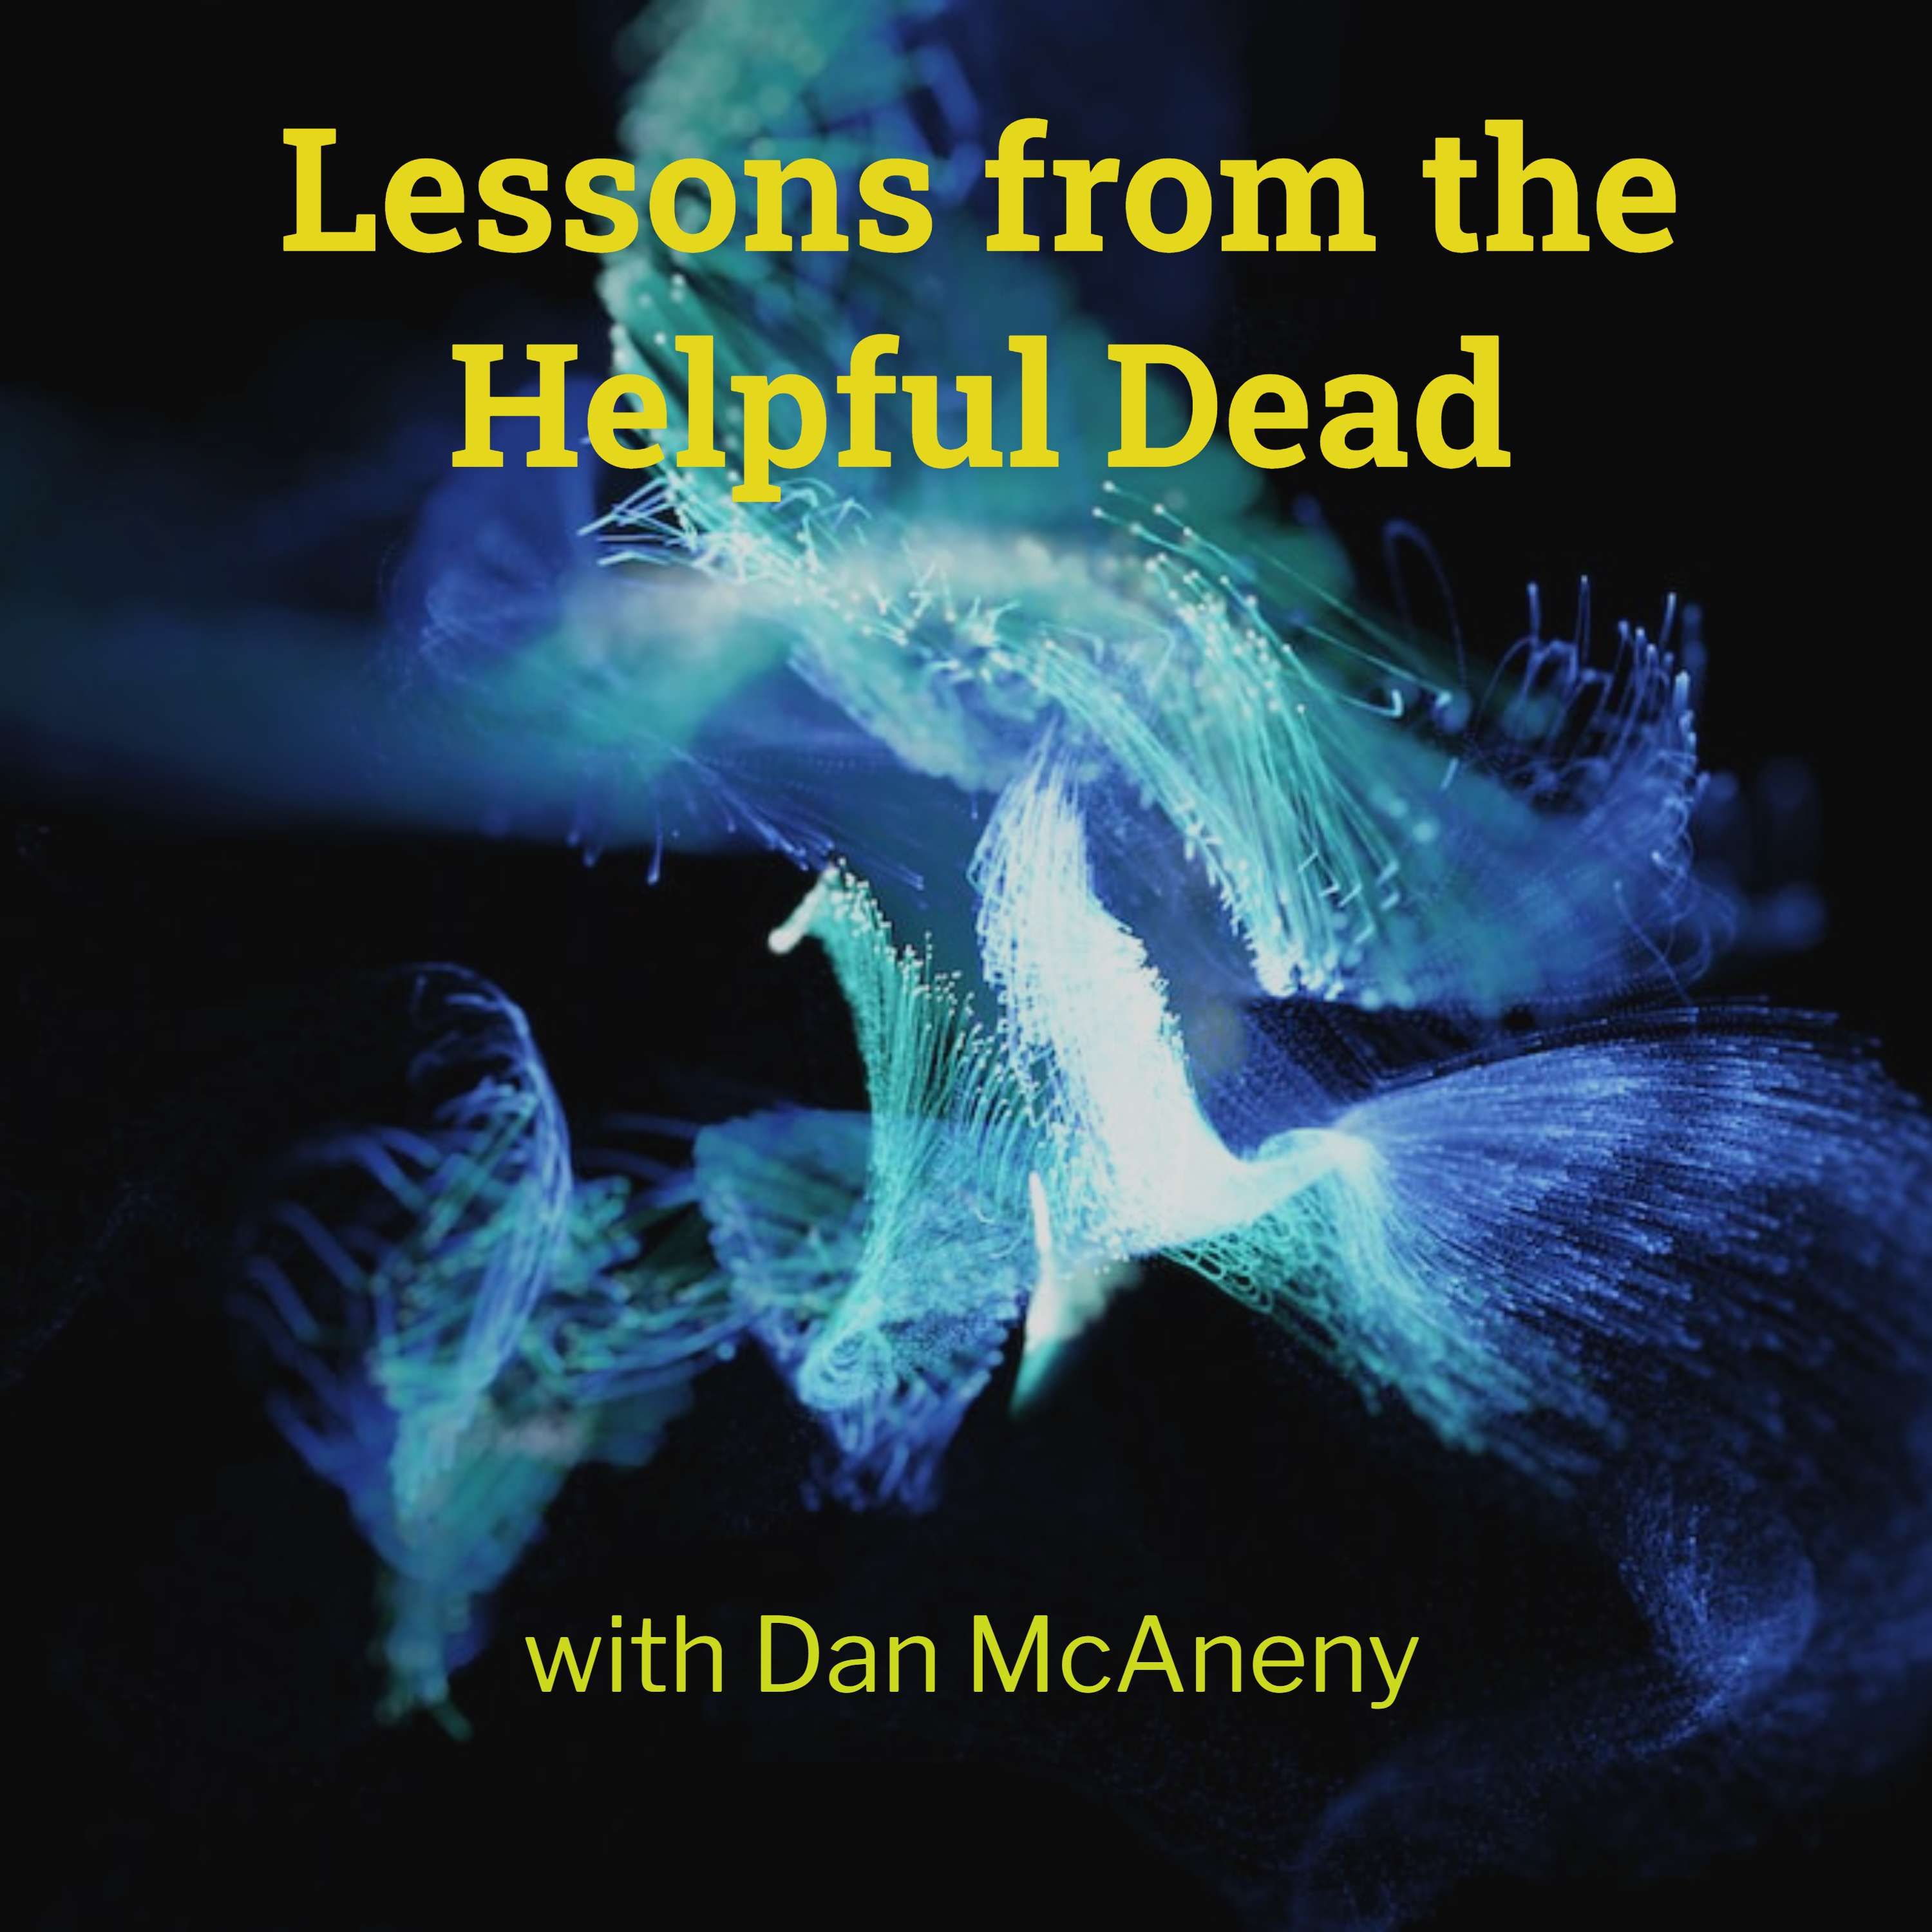 Early Episodes Now Available, Accessing Dan's Books, and a Review